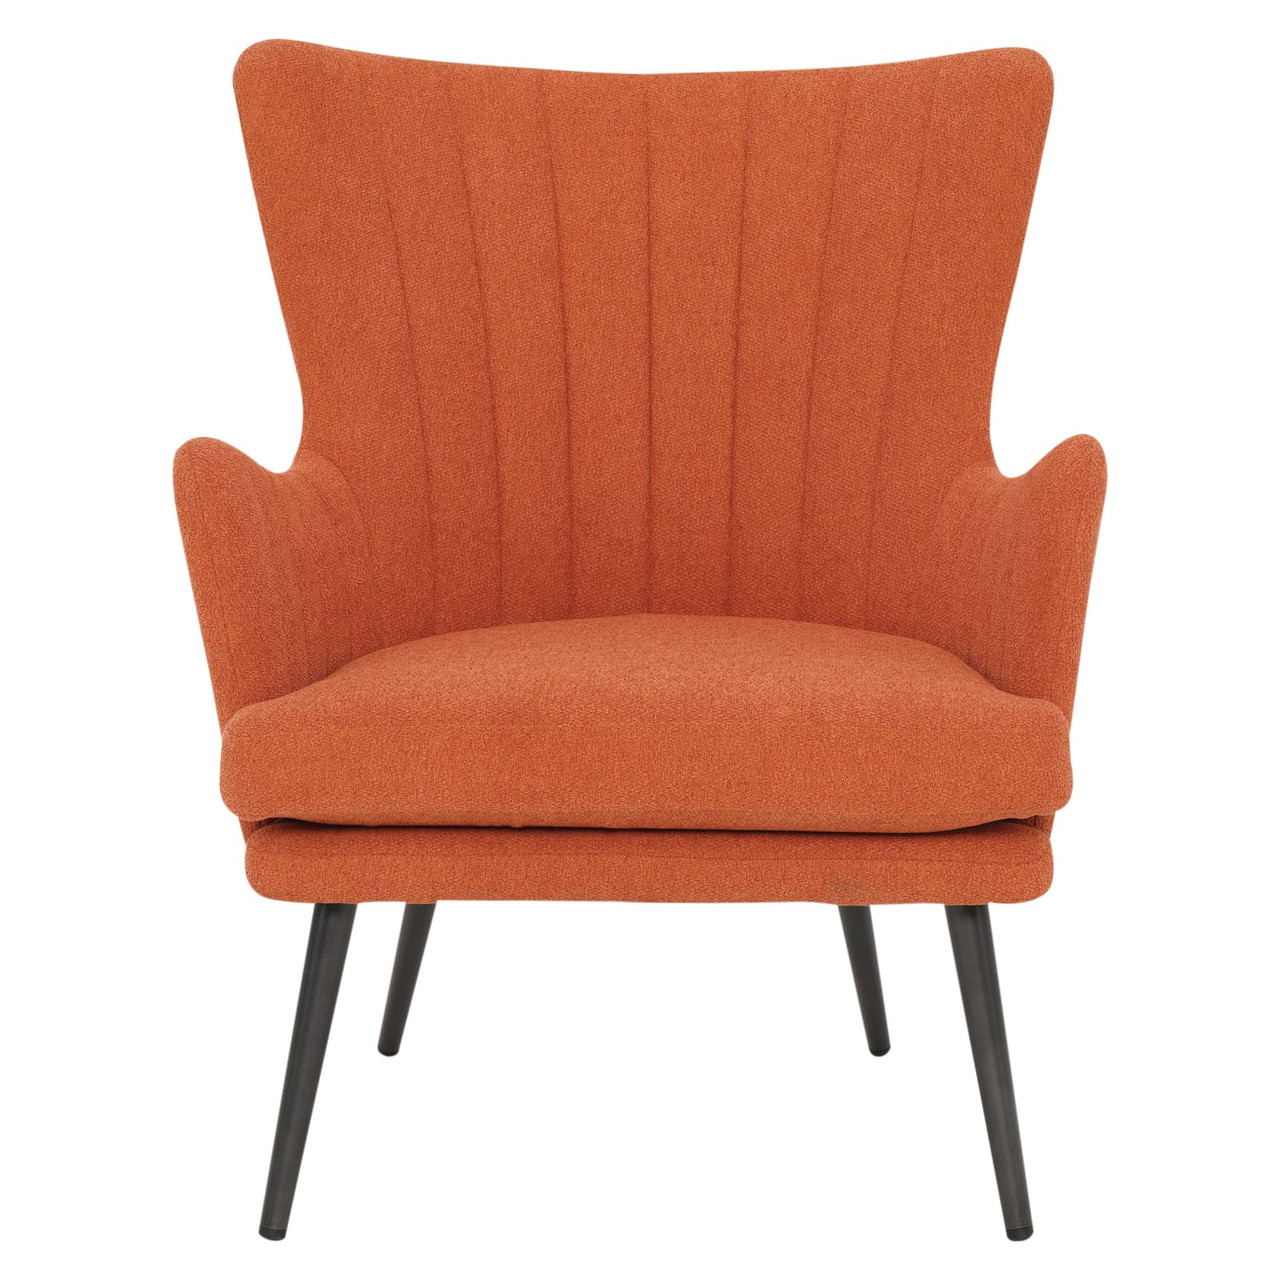 Jenson Accent Chair with Orange Fabric and Gray Legs